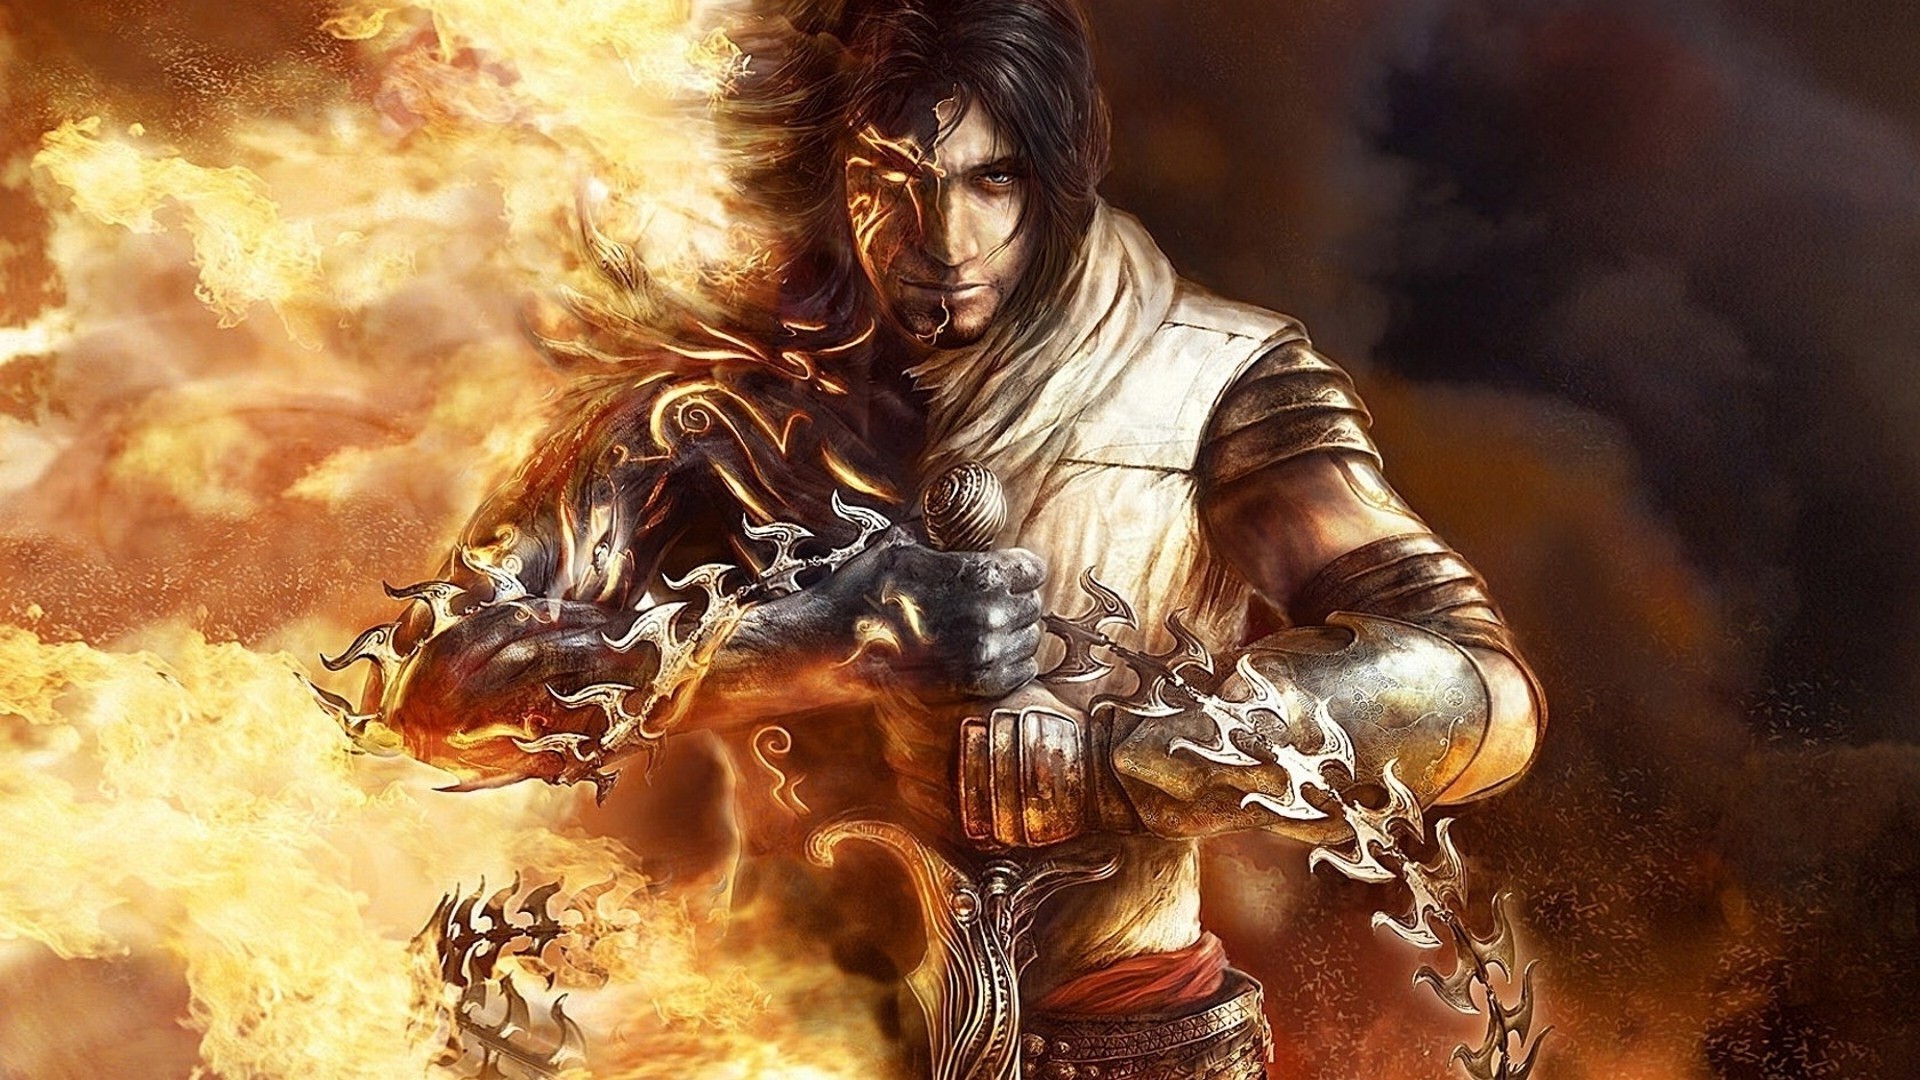 Prince Of Persia Two Thrones Wallpaper On